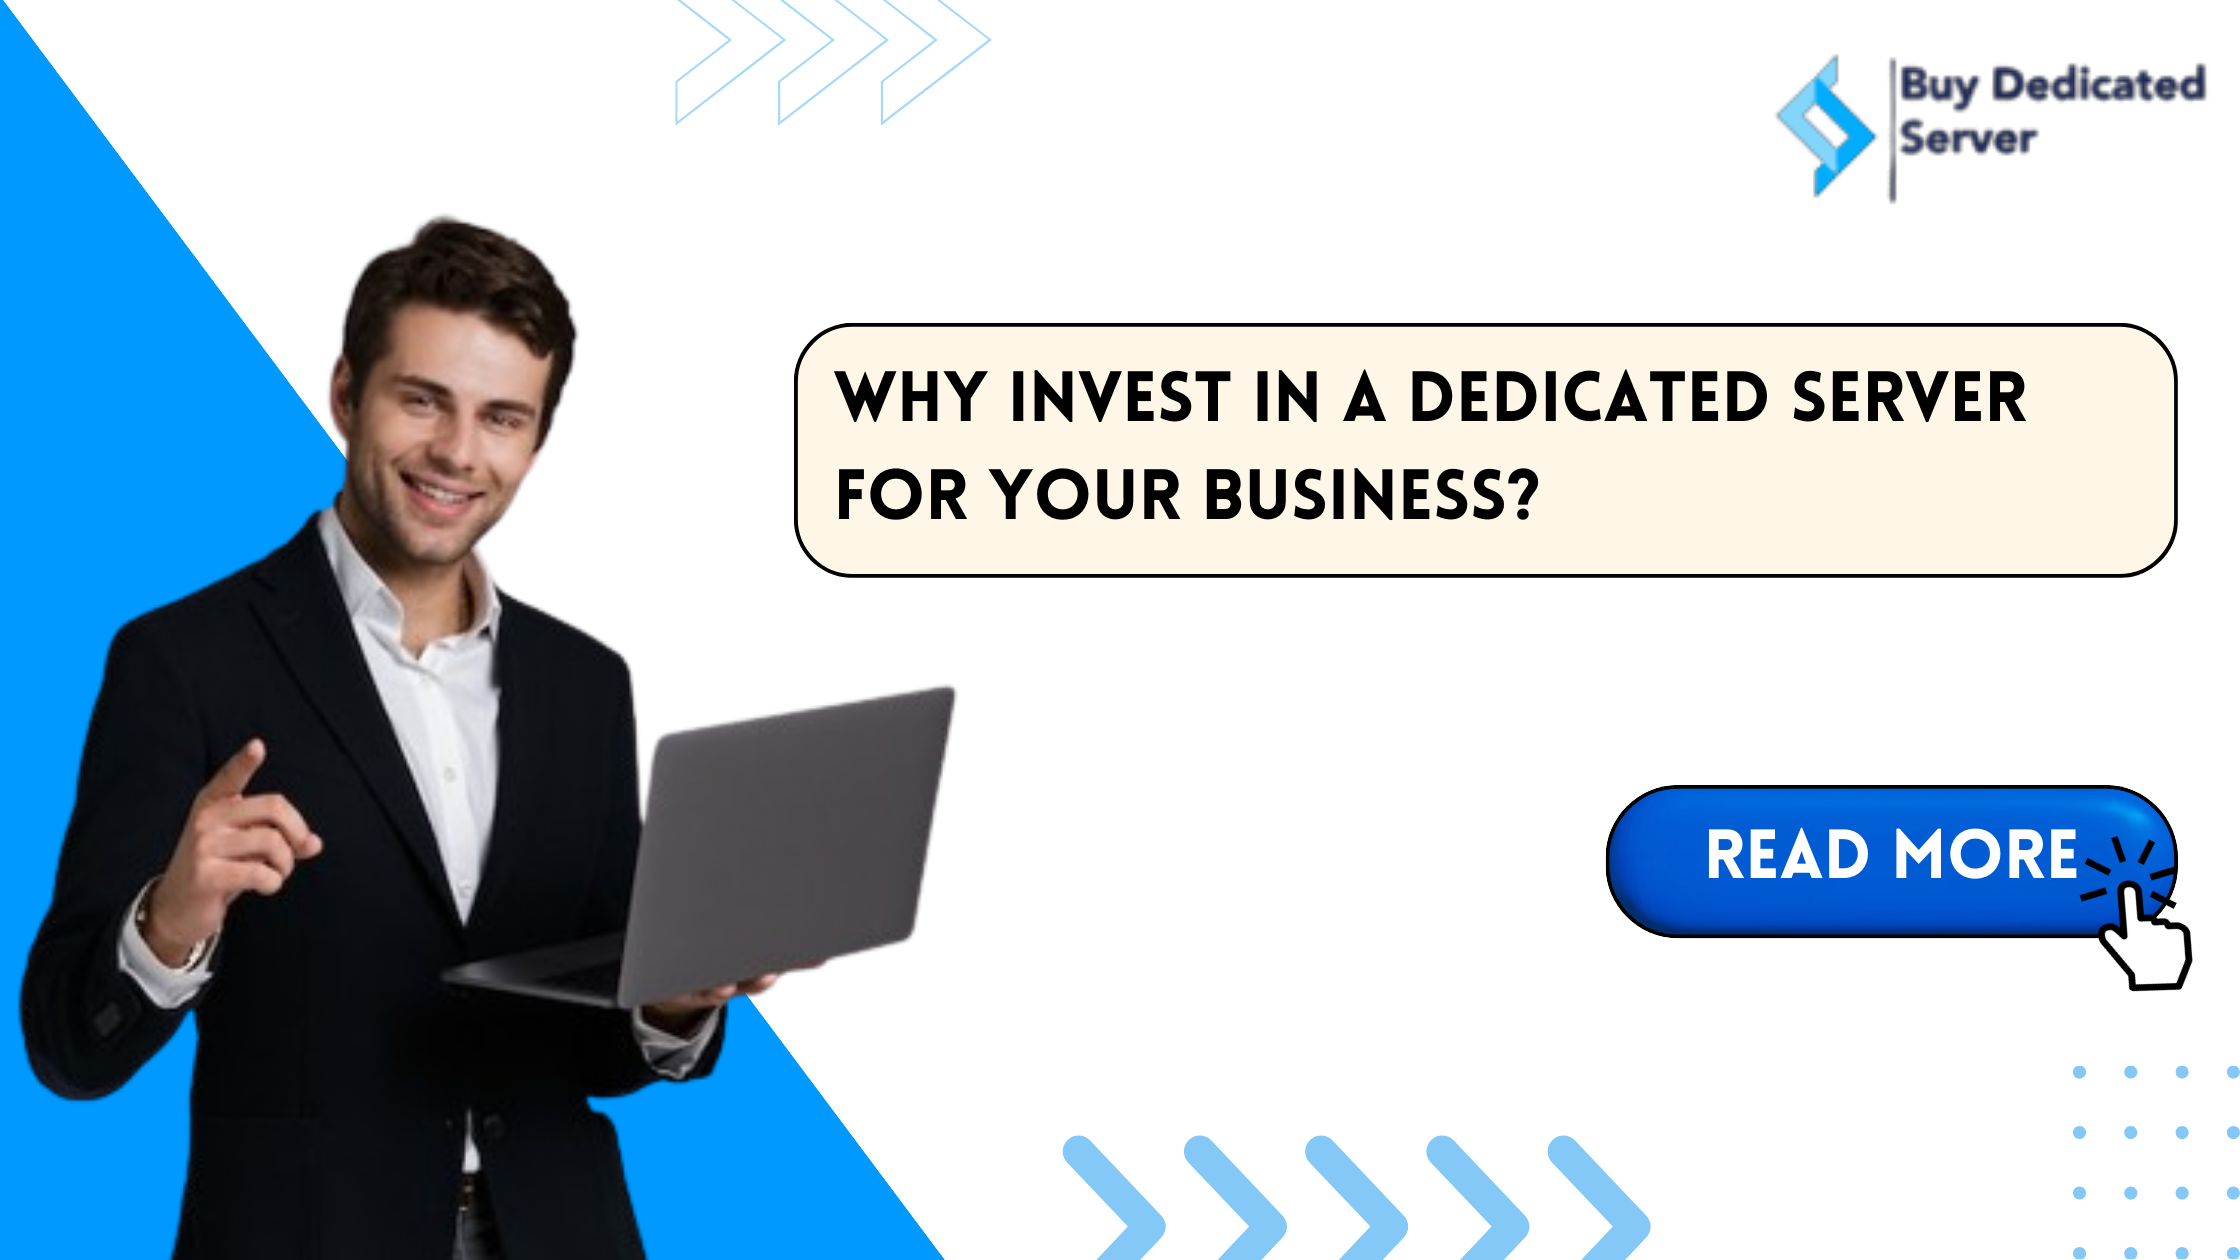 Why Invest in a Dedicated Server for Your Business